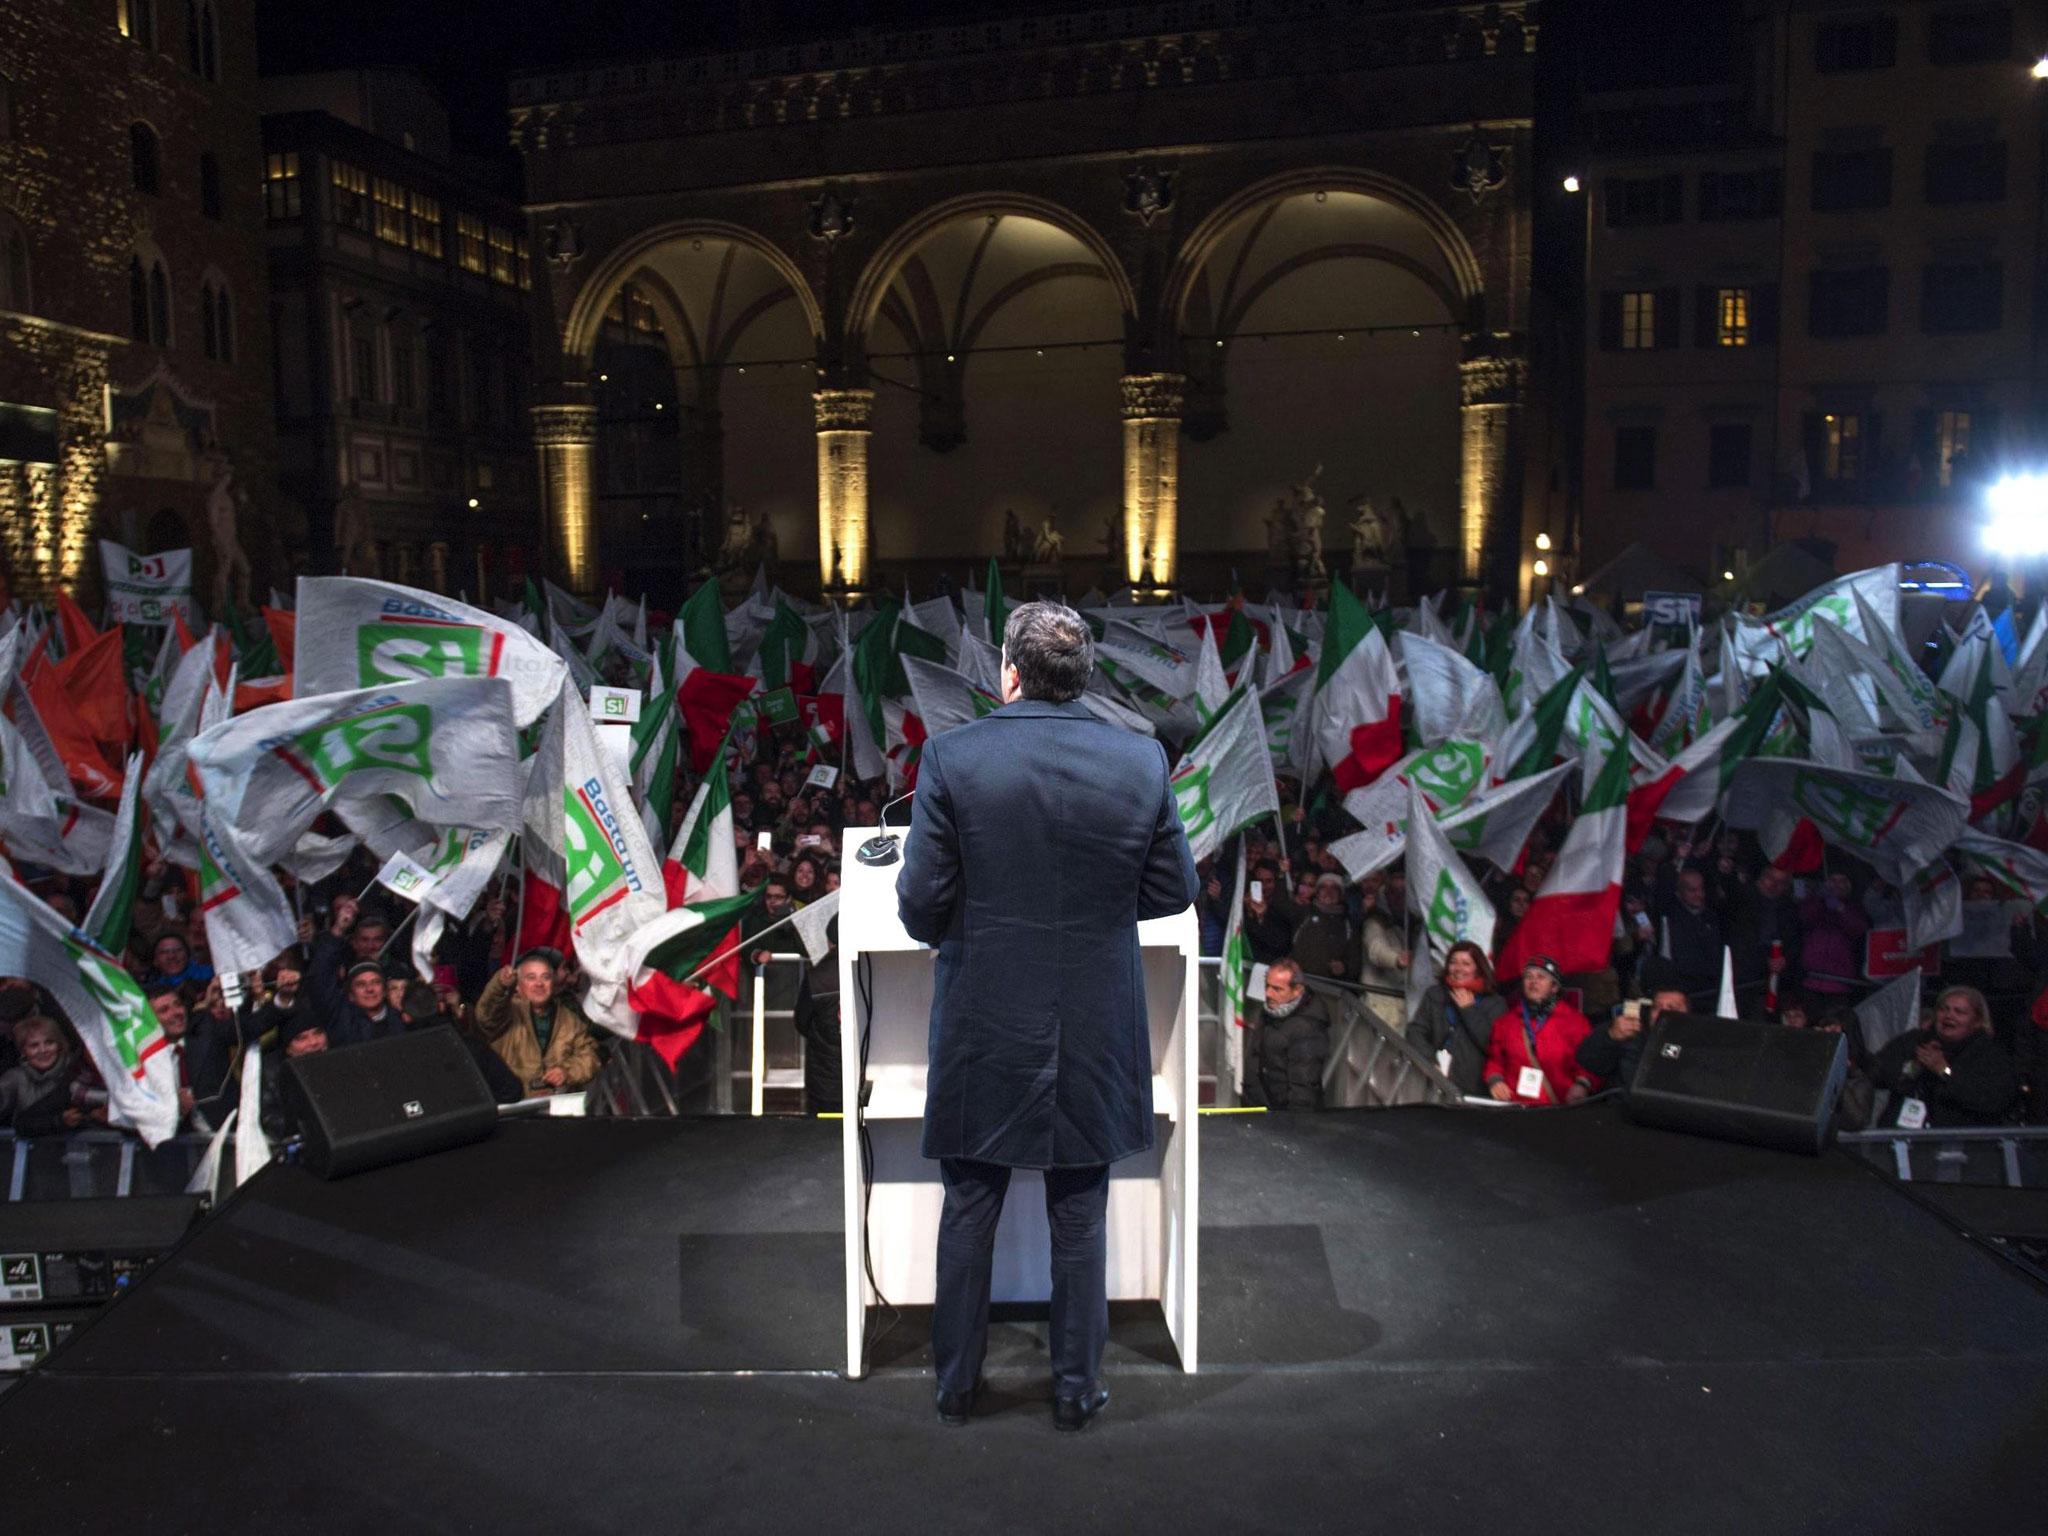 Matteo Renzi has said he will quit if he loses, which would spark renewed political turmoil